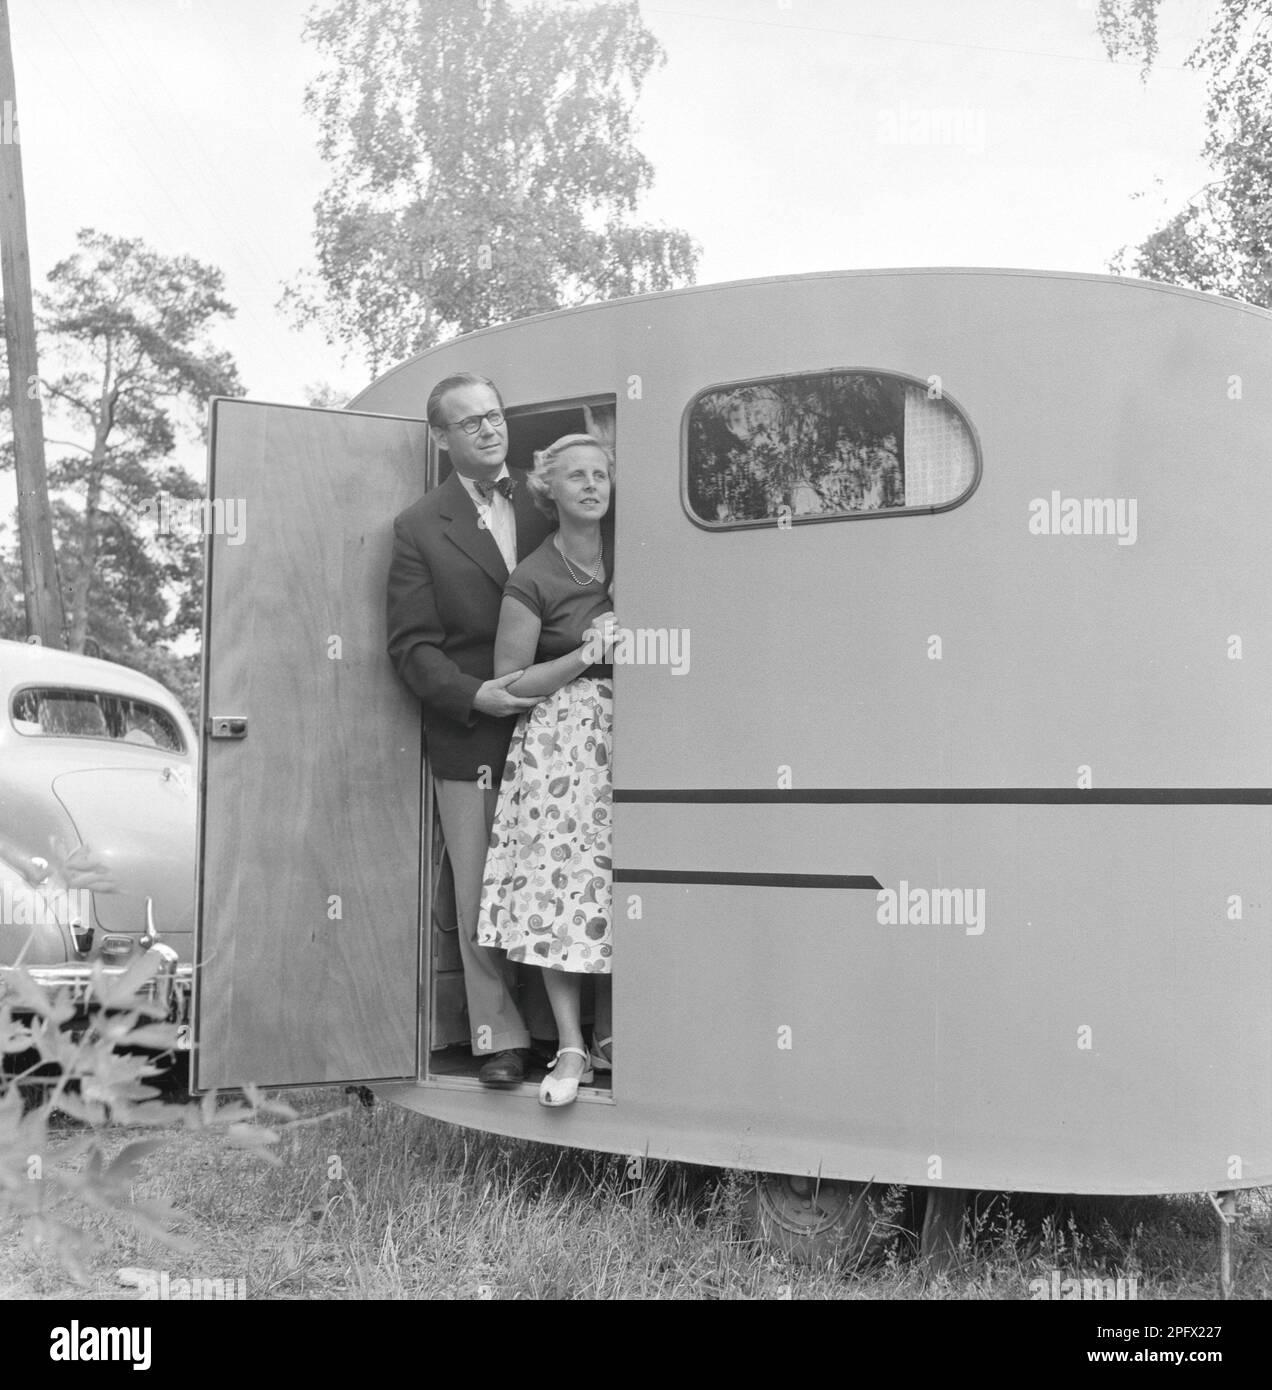 Caravan with owner Sten Hesser and wife, standing in the door. The image can be considered to illustrate the time in the 1950s when people in greater numbers had a car, and with it opportunities to travel and vacation Sweden July. 1953. ref SSMSAX000433L Stock Photo